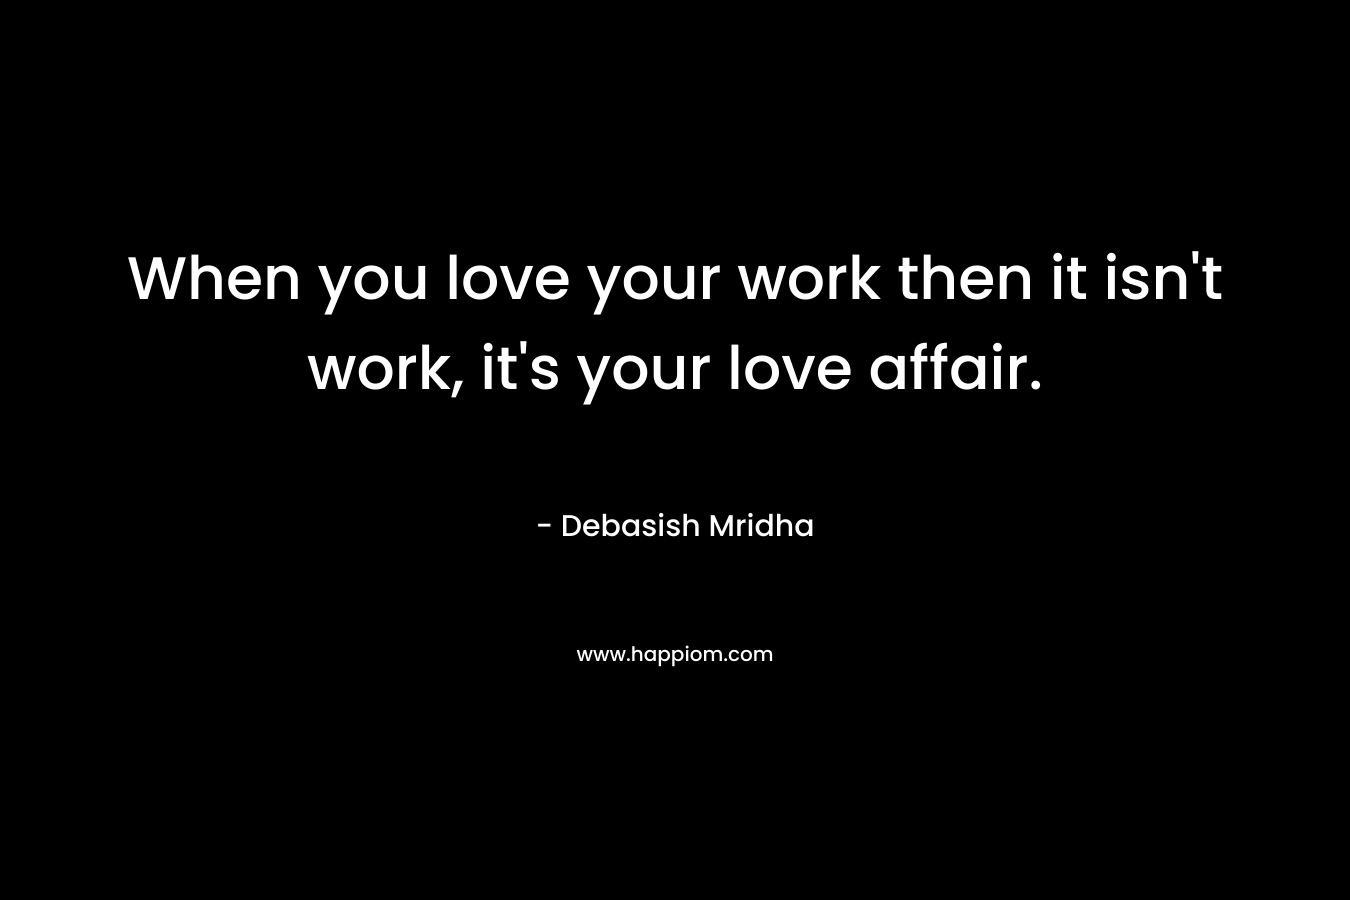 When you love your work then it isn't work, it's your love affair.